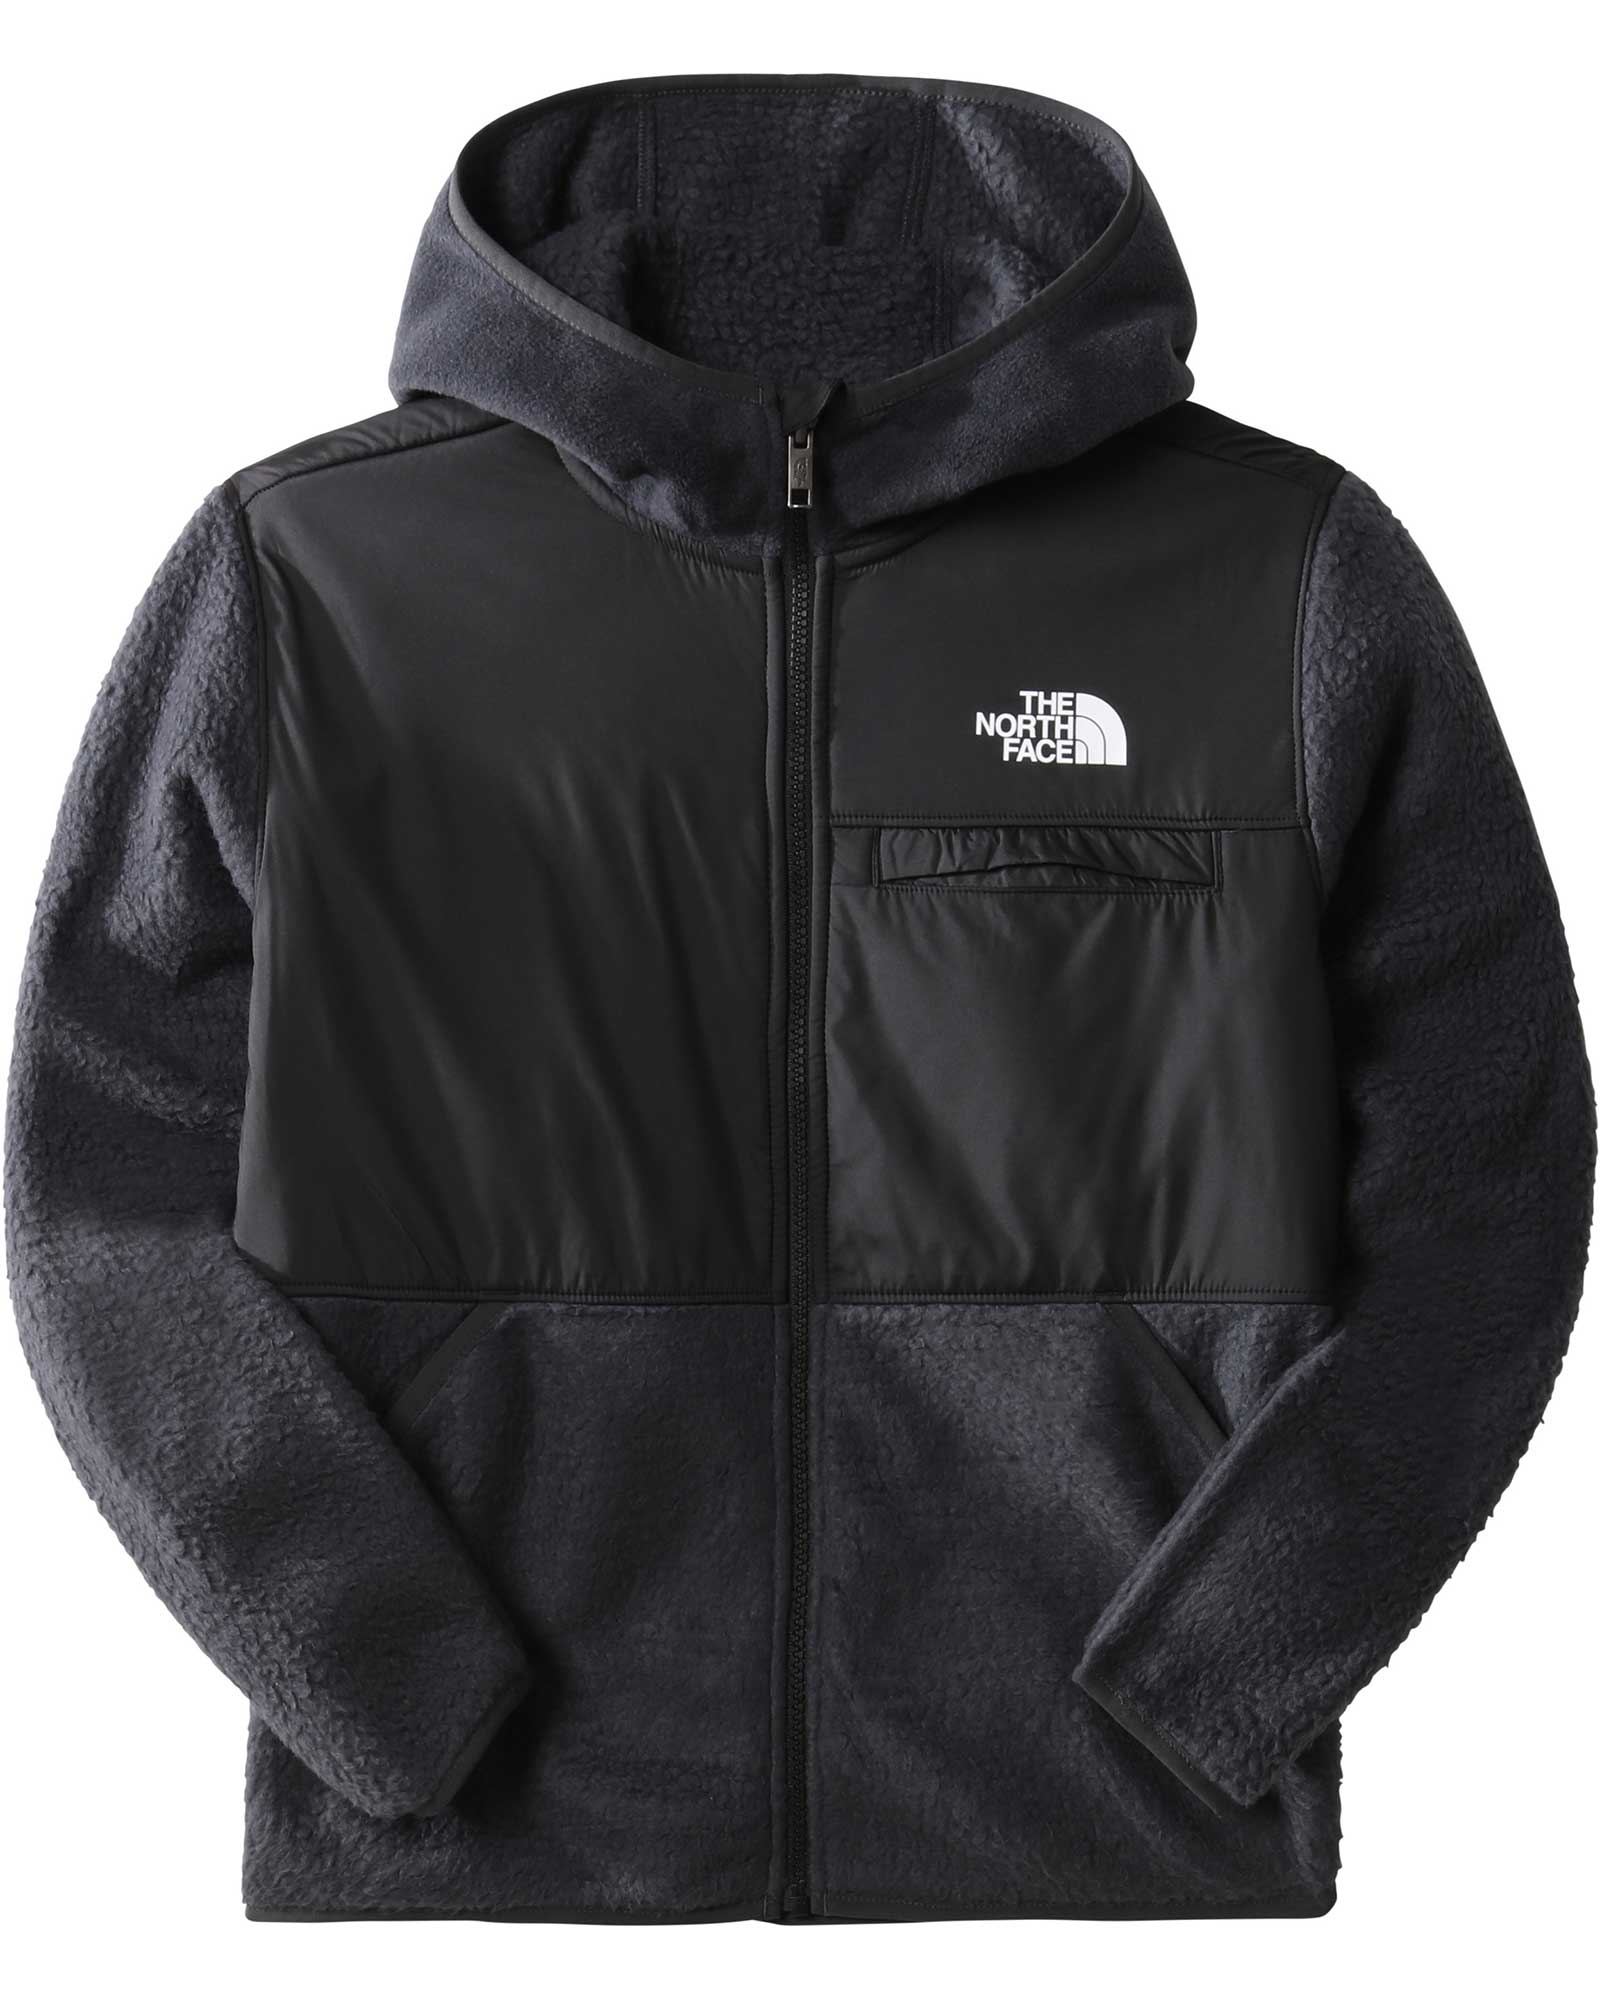 Product image of The North Face Forrest Kids' Fleece Full Zip Hooded Jacket